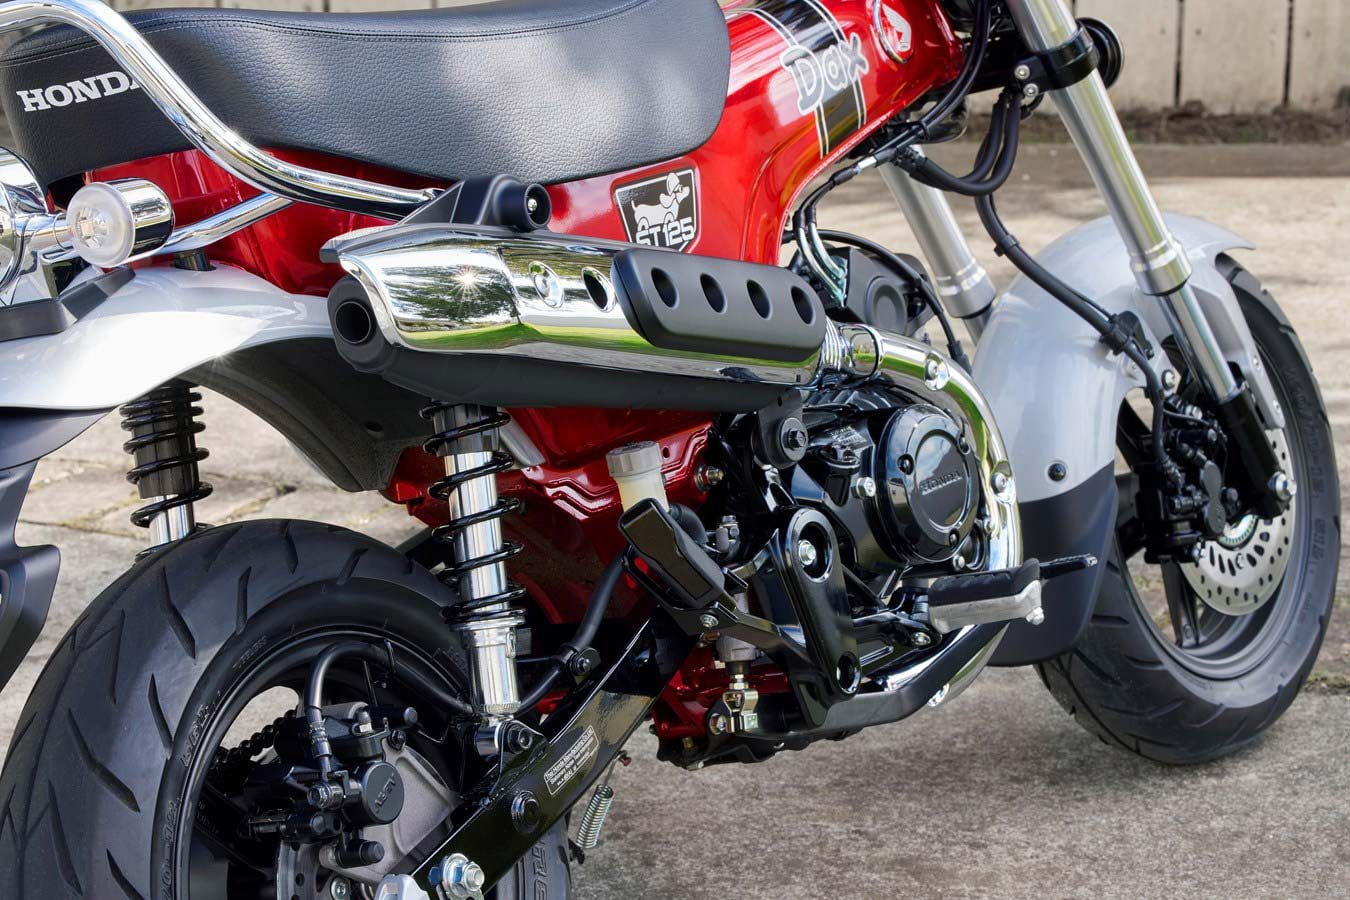 The ST125 carries over the same single-cylinder motor from the Grom and Monkey, though here it’s mounted in a pressed steel frame and gets a semi-automatic transmission.